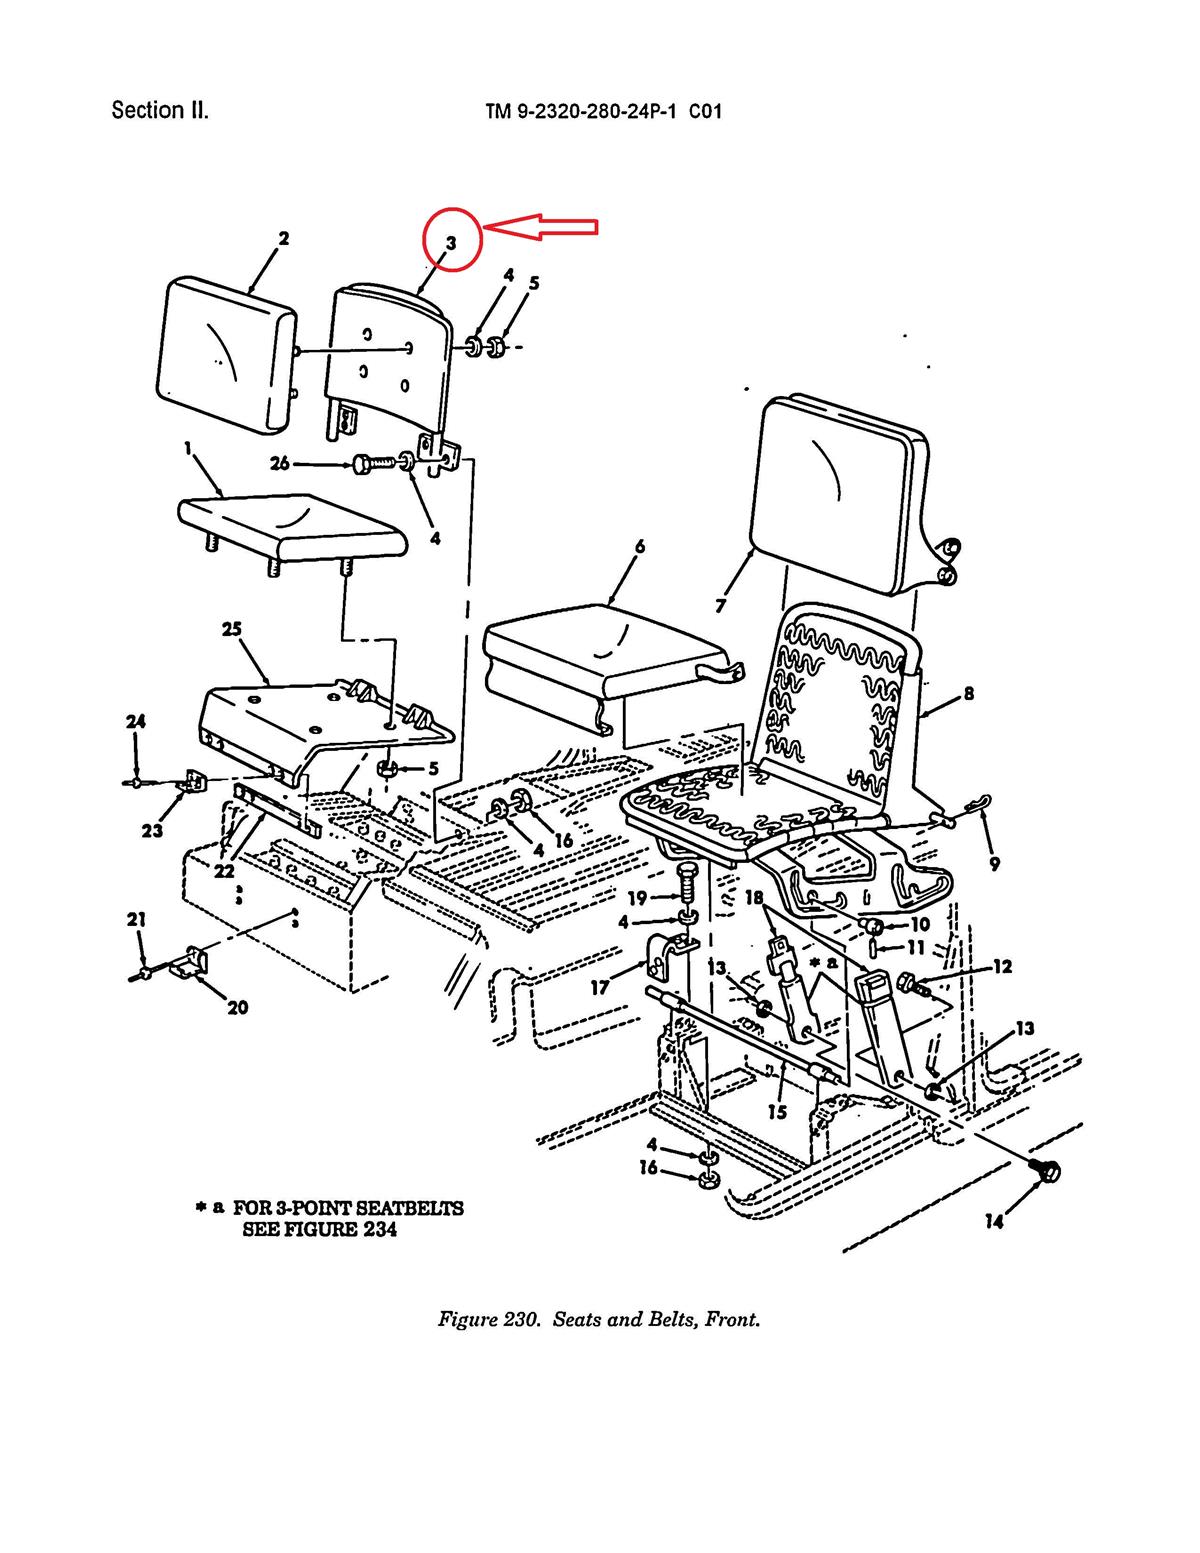 HM-572 | 2540-01-184-4387 Right Rear Seat Support for HMMWV Diagram.jpg